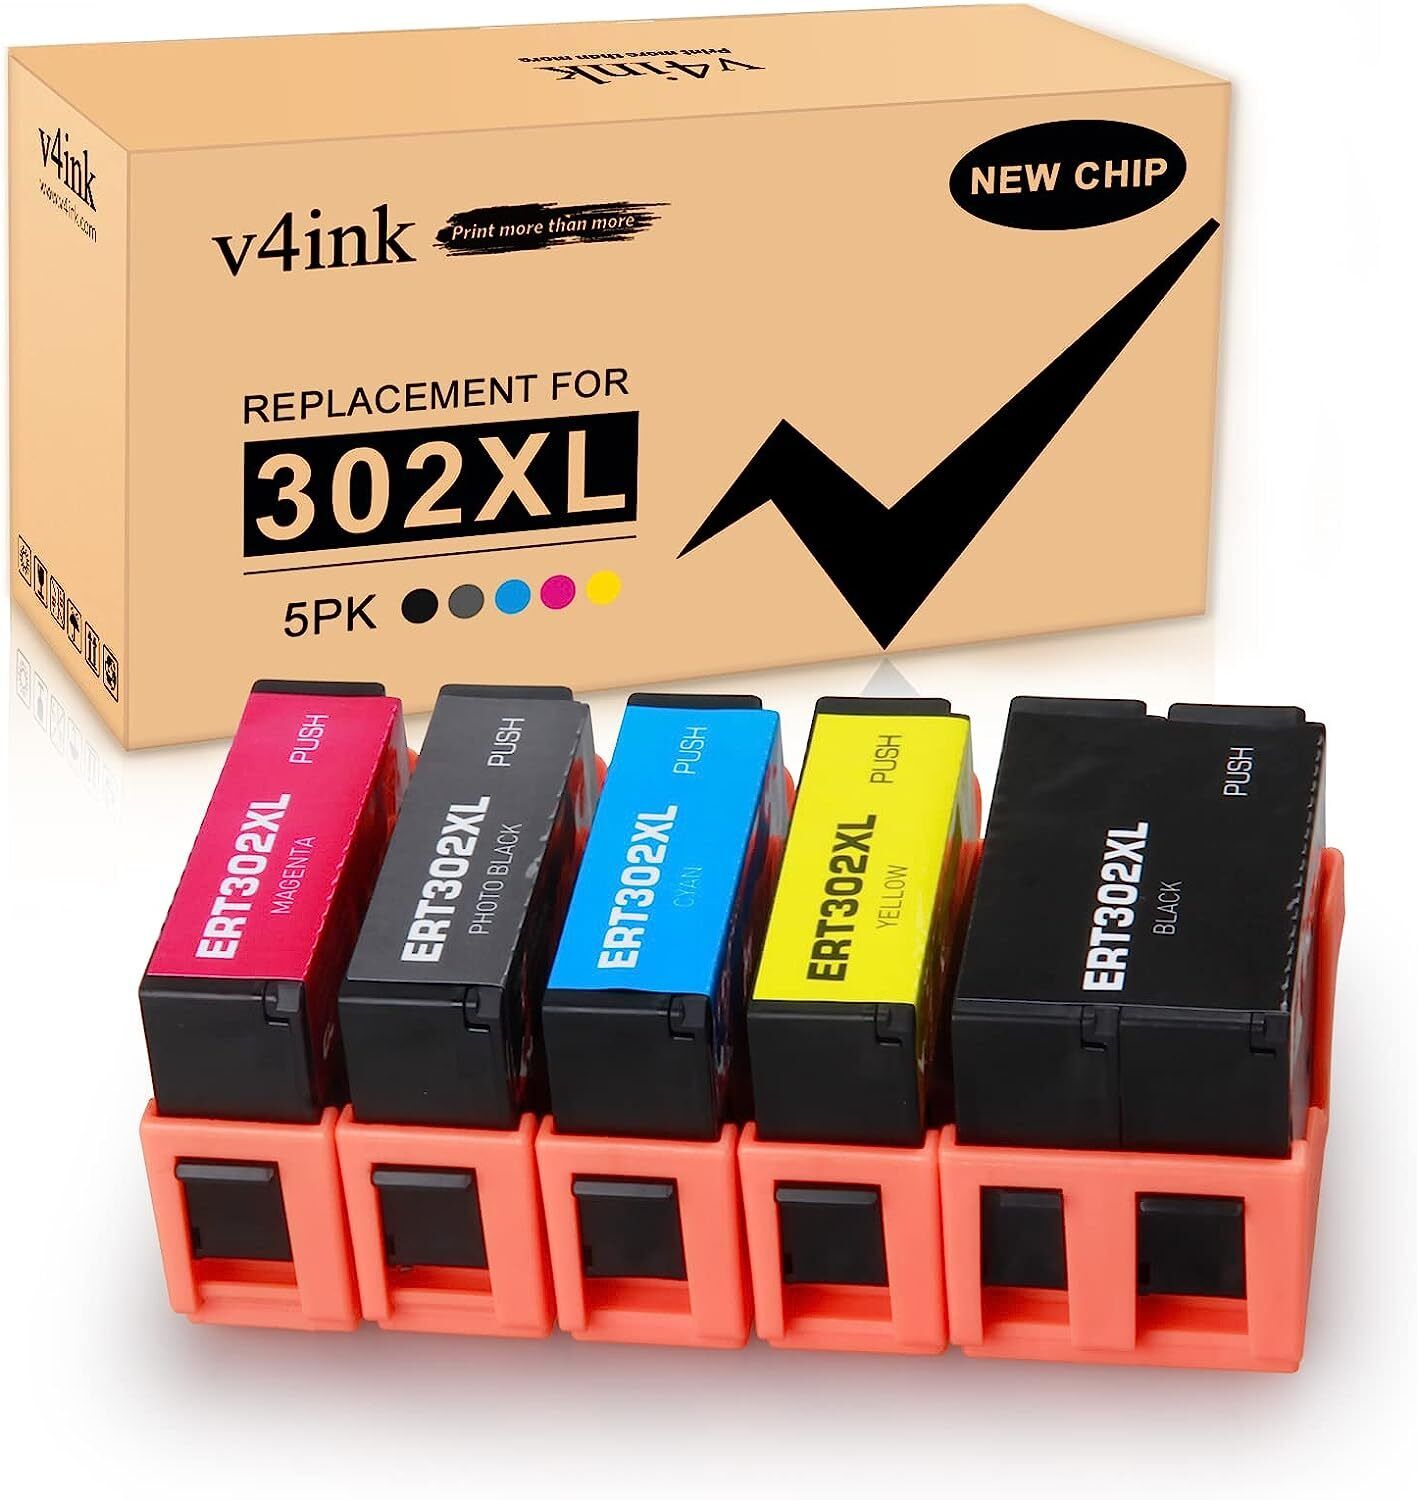 Multipack 302XL T302XL Ink Cartridge for Epson Expression Premium XP-6000 6100